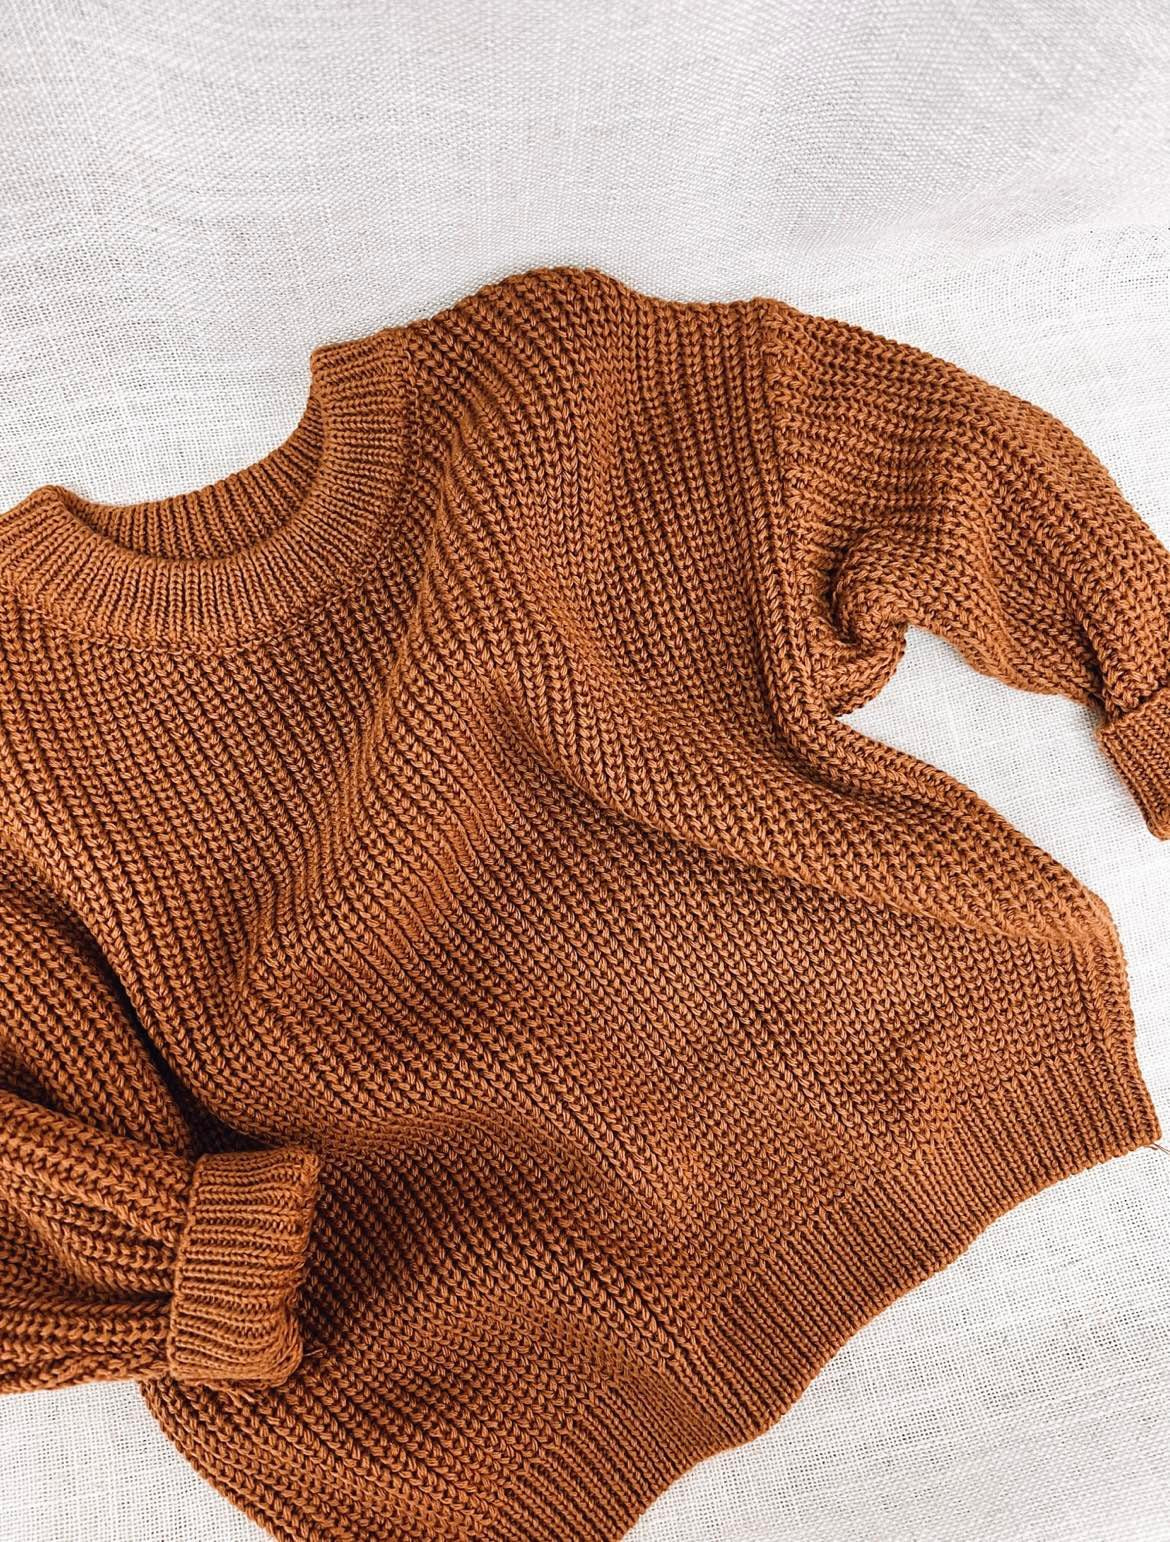 Baby Knit Coffee